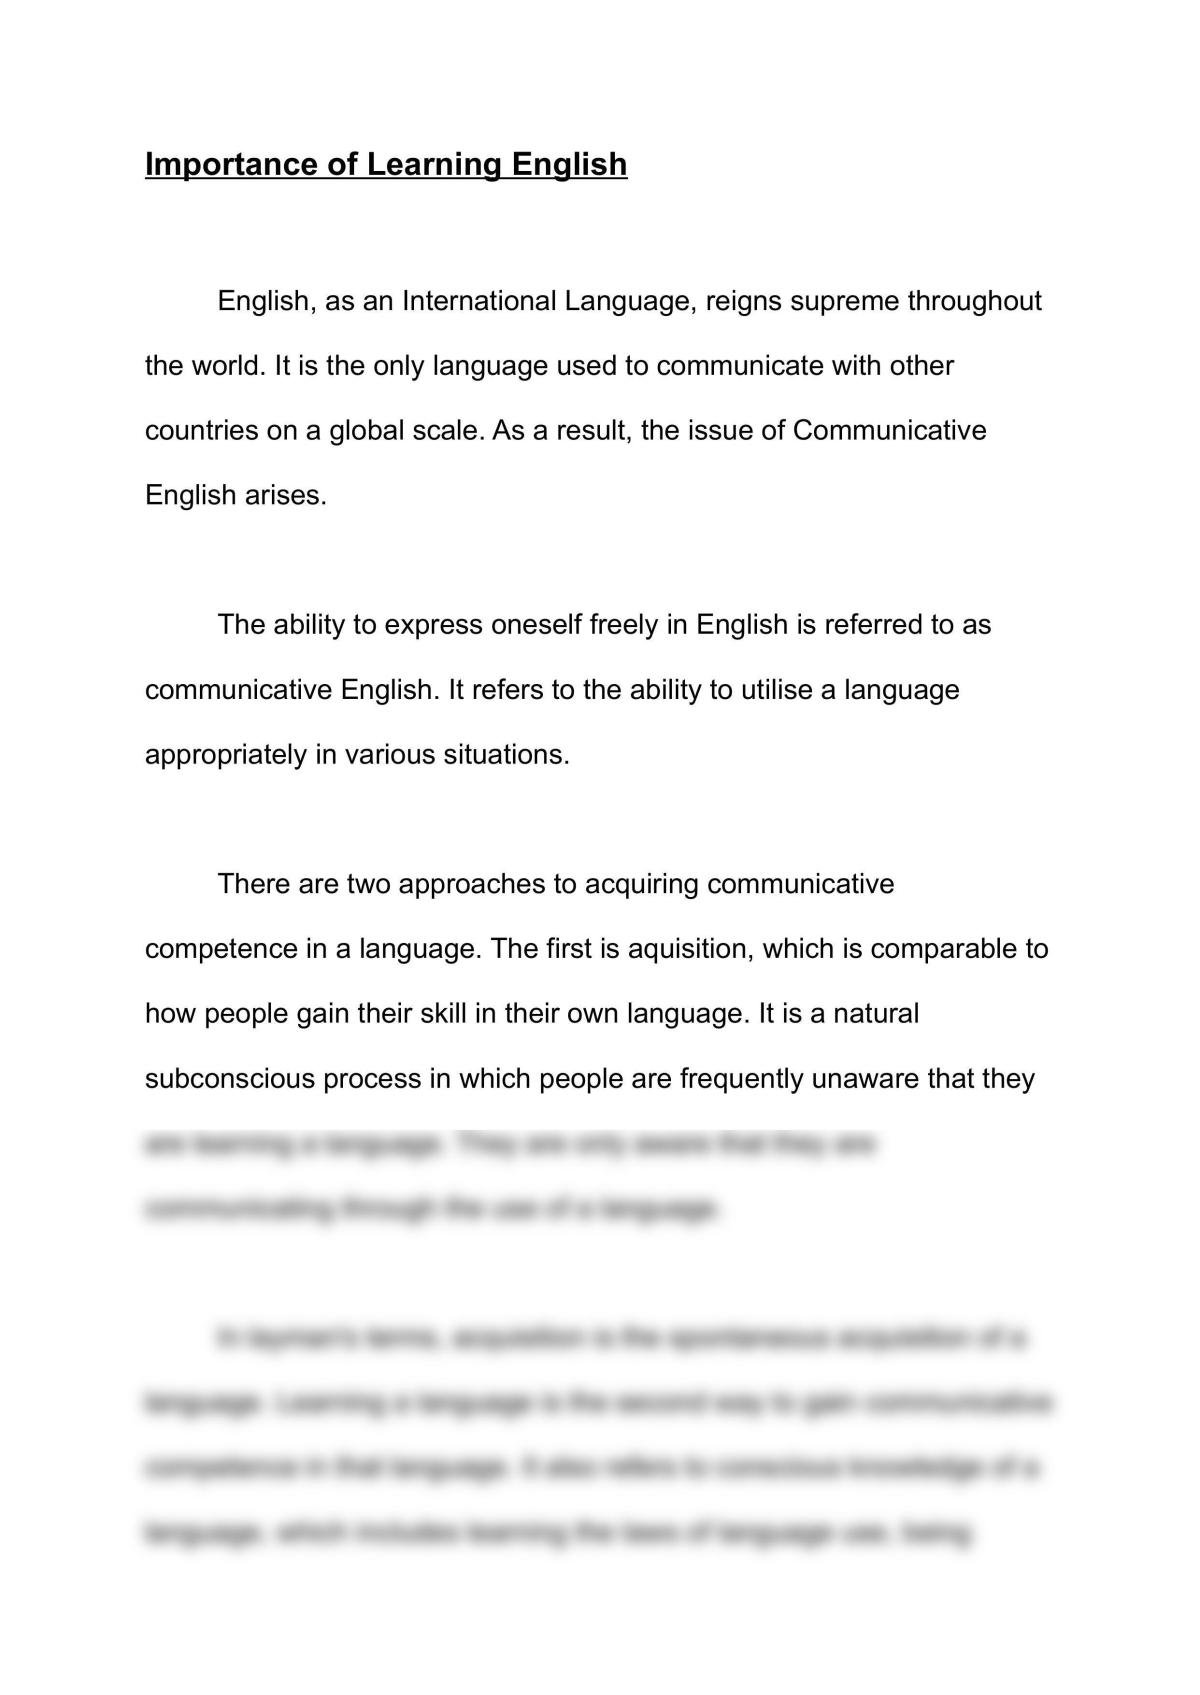 write an essay about advantages of learning english